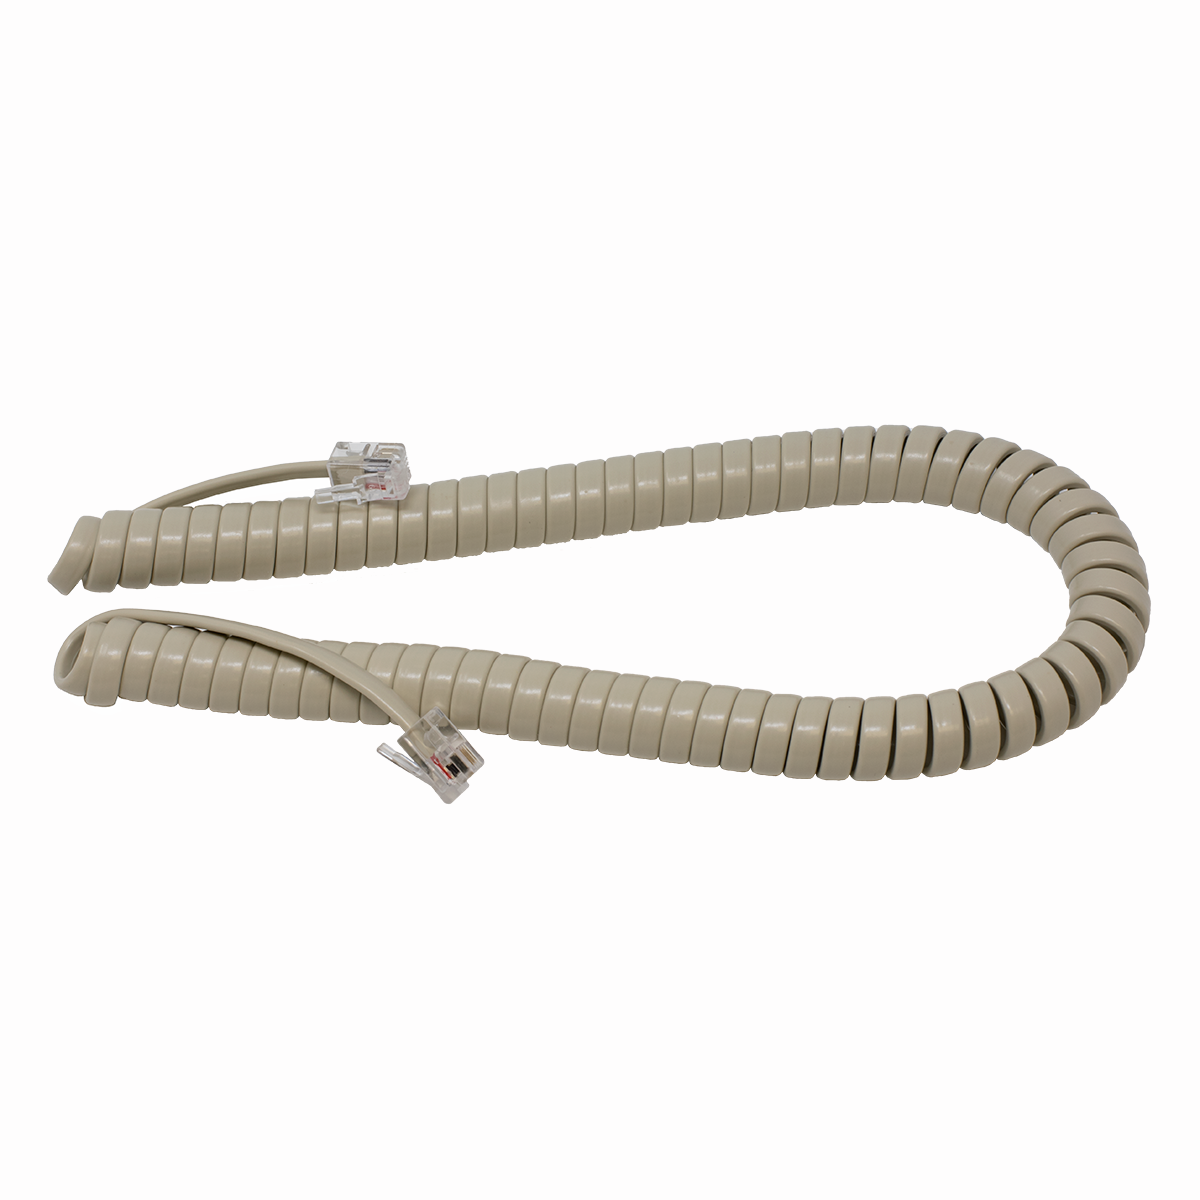  7' Ash Coiled Handset Cord